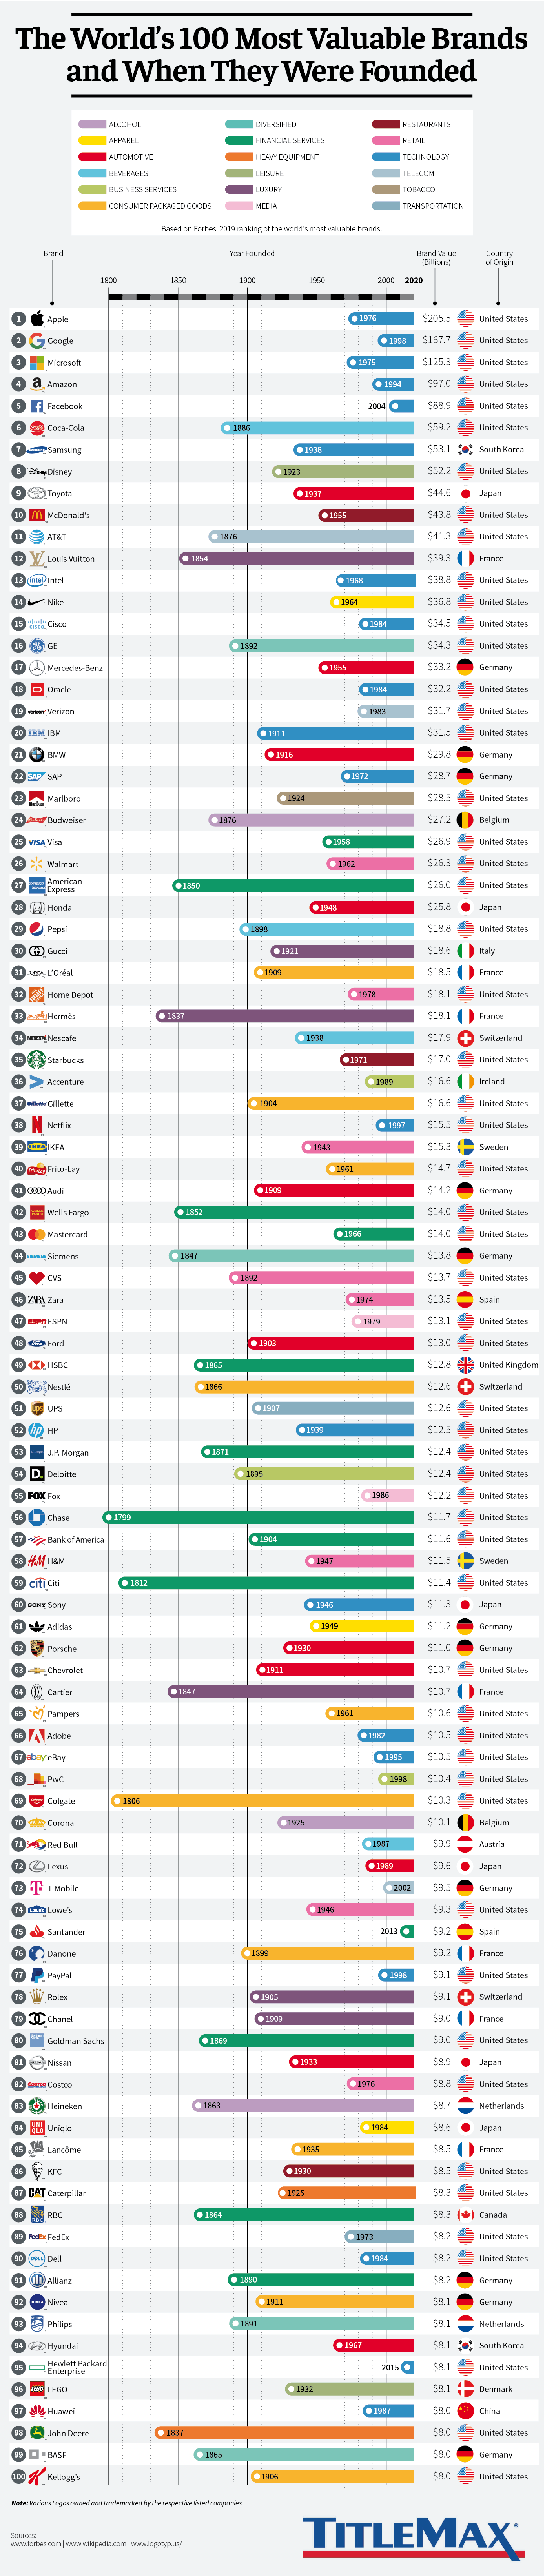 The World's Most Valuable Brands and When They Were Founded